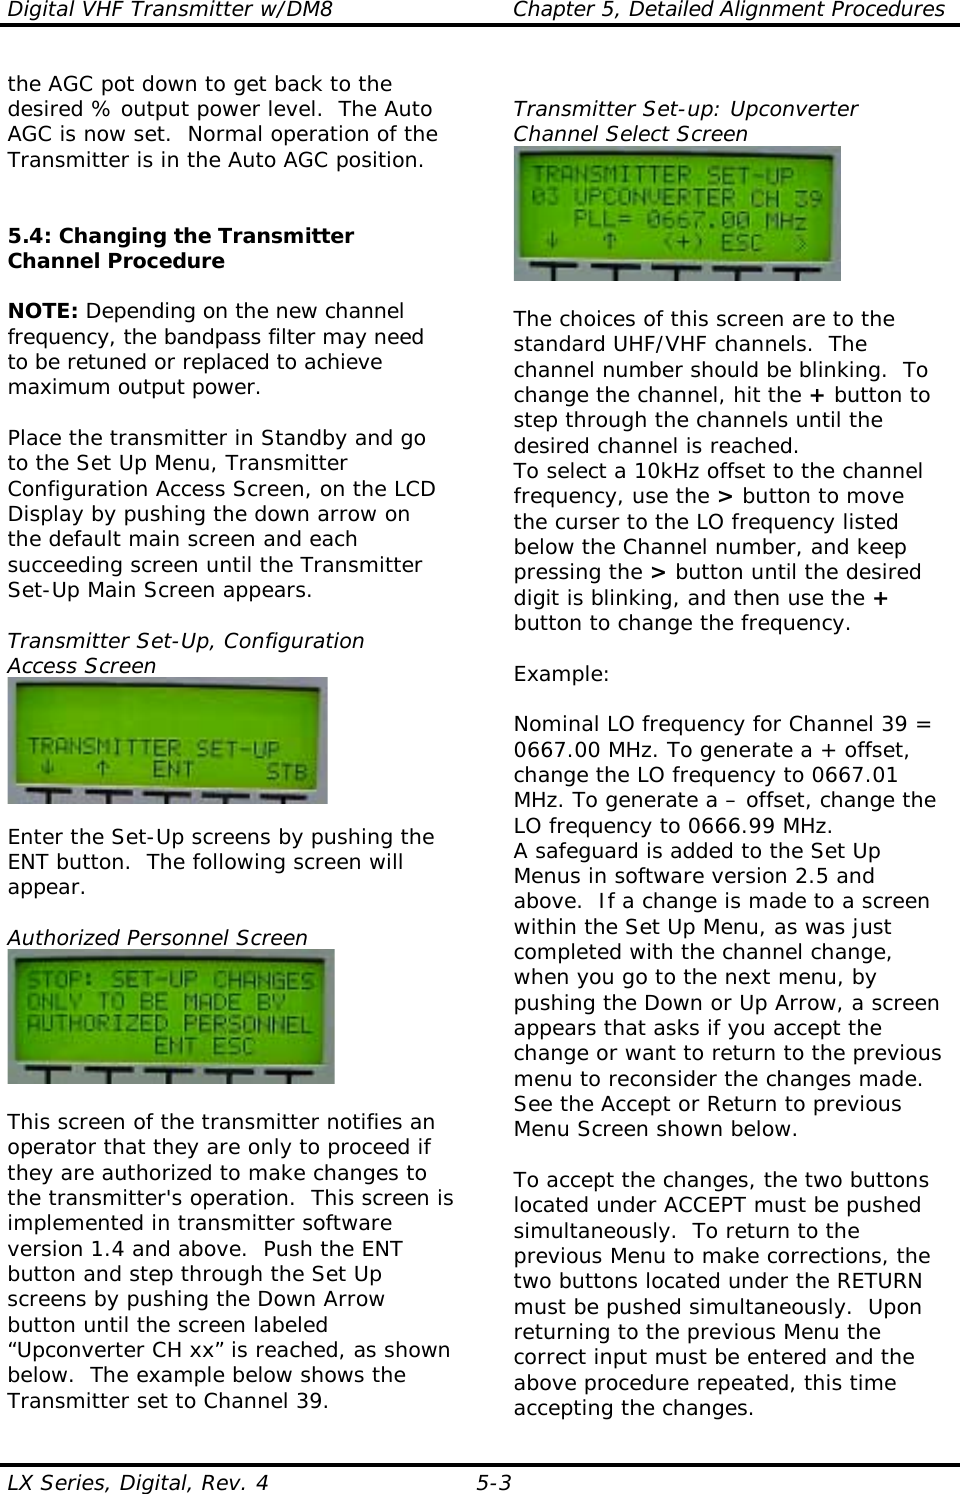 Digital VHF Transmitter w/DM8  Chapter 5, Detailed Alignment Procedures  LX Series, Digital, Rev. 4  5-3 the AGC pot down to get back to the desired % output power level.  The Auto AGC is now set.  Normal operation of the Transmitter is in the Auto AGC position.   5.4: Changing the Transmitter Channel Procedure  NOTE: Depending on the new channel frequency, the bandpass filter may need to be retuned or replaced to achieve maximum output power.  Place the transmitter in Standby and go to the Set Up Menu, Transmitter Configuration Access Screen, on the LCD Display by pushing the down arrow on the default main screen and each succeeding screen until the Transmitter Set-Up Main Screen appears.  Transmitter Set-Up, Configuration Access Screen   Enter the Set-Up screens by pushing the ENT button.  The following screen will appear.  Authorized Personnel Screen   This screen of the transmitter notifies an operator that they are only to proceed if they are authorized to make changes to the transmitter&apos;s operation.  This screen is implemented in transmitter software version 1.4 and above.  Push the ENT button and step through the Set Up screens by pushing the Down Arrow button until the screen labeled “Upconverter CH xx” is reached, as shown below.  The example below shows the Transmitter set to Channel 39.  Transmitter Set-up: Upconverter Channel Select Screen   The choices of this screen are to the standard UHF/VHF channels.  The channel number should be blinking.  To change the channel, hit the + button to step through the channels until the desired channel is reached.  To select a 10kHz offset to the channel frequency, use the &gt; button to move the curser to the LO frequency listed below the Channel number, and keep pressing the &gt; button until the desired digit is blinking, and then use the + button to change the frequency.   Example:  Nominal LO frequency for Channel 39 = 0667.00 MHz. To generate a + offset, change the LO frequency to 0667.01 MHz. To generate a – offset, change the LO frequency to 0666.99 MHz. A safeguard is added to the Set Up Menus in software version 2.5 and above.  If a change is made to a screen within the Set Up Menu, as was just completed with the channel change, when you go to the next menu, by pushing the Down or Up Arrow, a screen appears that asks if you accept the change or want to return to the previous menu to reconsider the changes made.  See the Accept or Return to previous Menu Screen shown below.  To accept the changes, the two buttons located under ACCEPT must be pushed simultaneously.  To return to the previous Menu to make corrections, the two buttons located under the RETURN must be pushed simultaneously.  Upon returning to the previous Menu the correct input must be entered and the above procedure repeated, this time accepting the changes. 